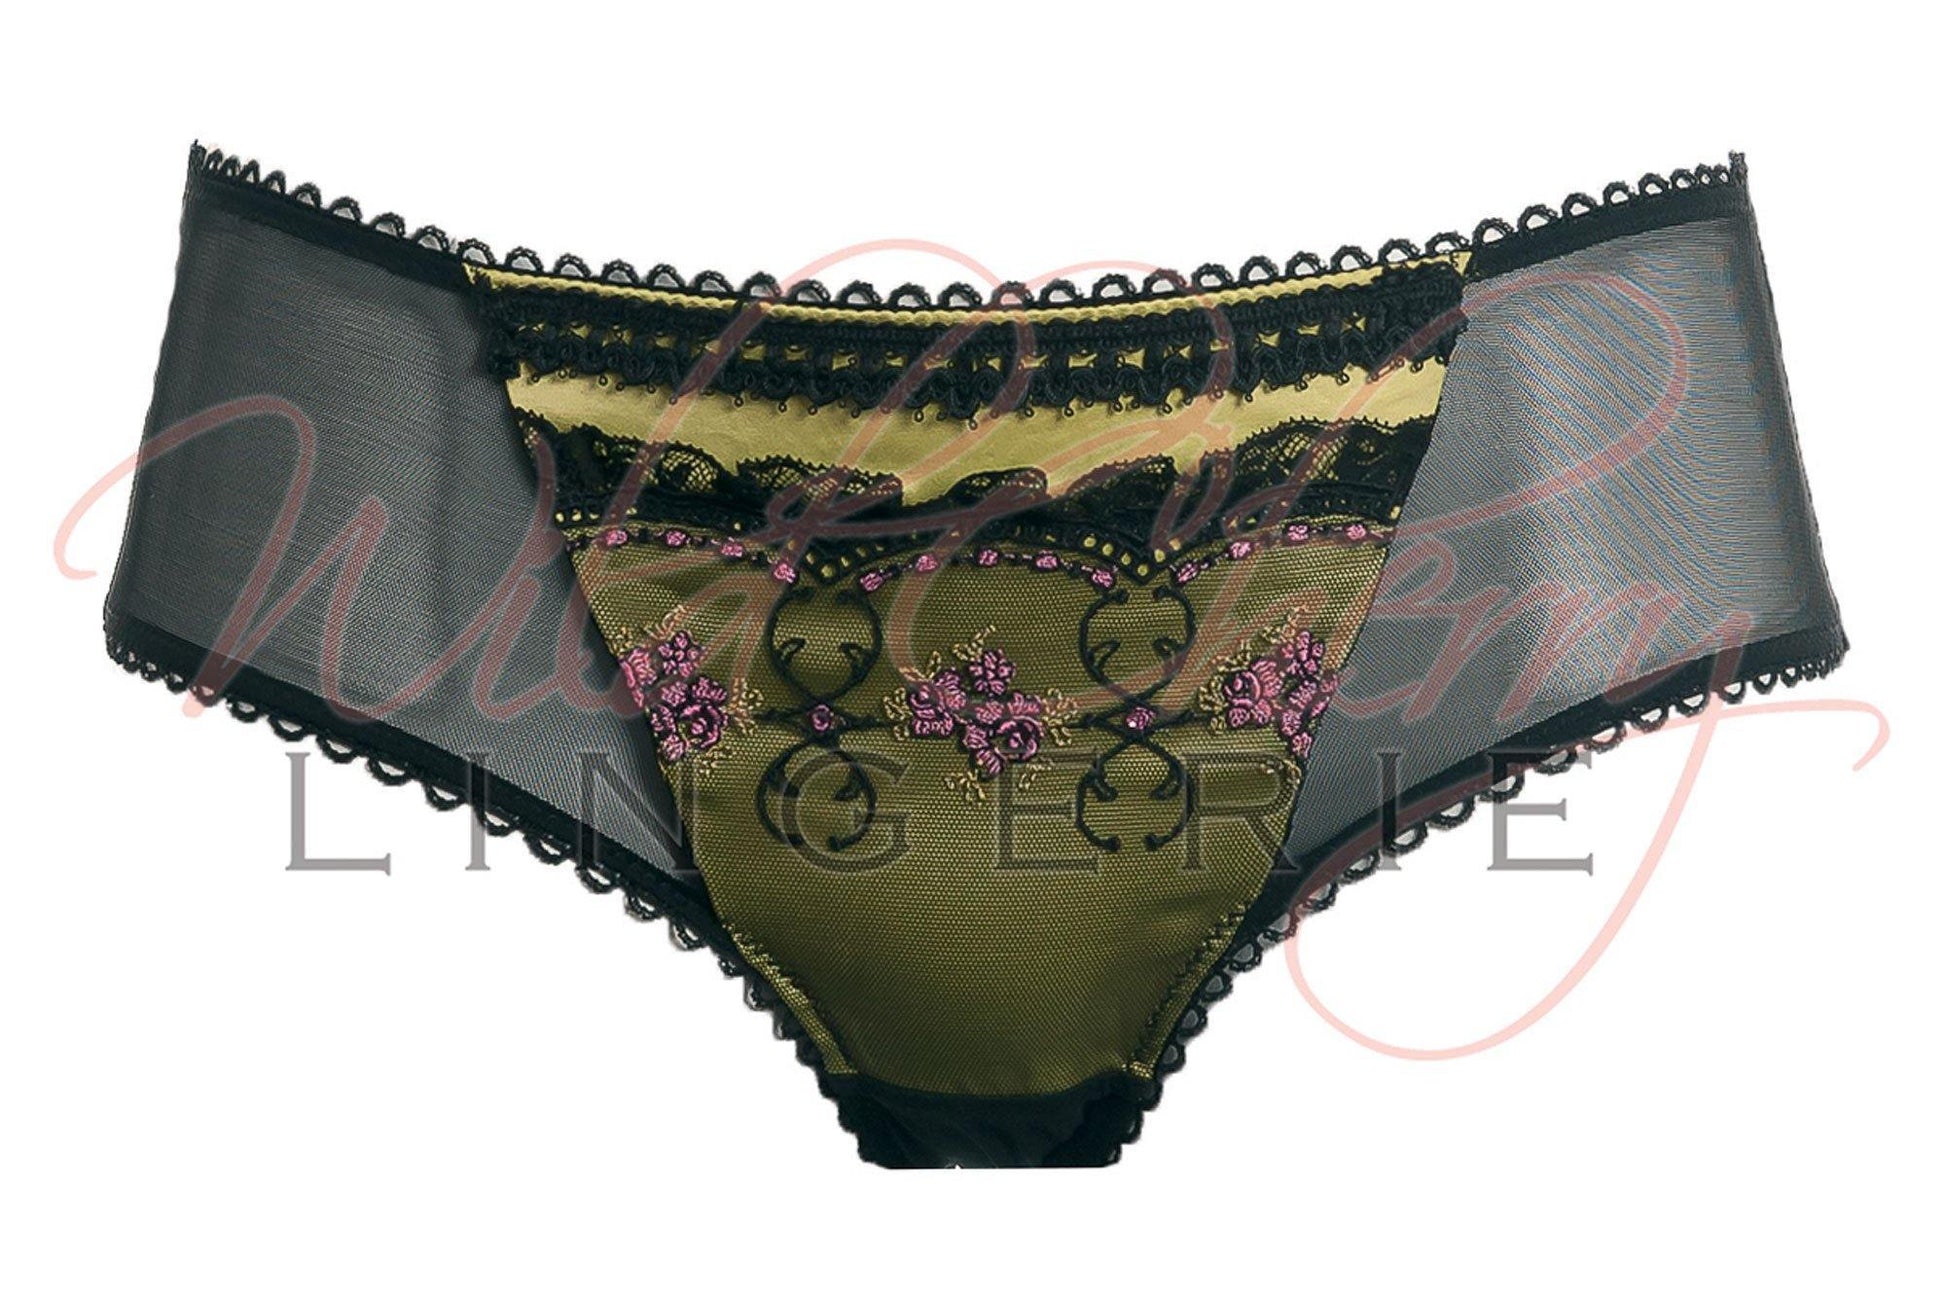 Hilton Collection Hipster Panty VIPA Lingerie, Panties, VIPA Lingerie - Wild Cherry Lingerie